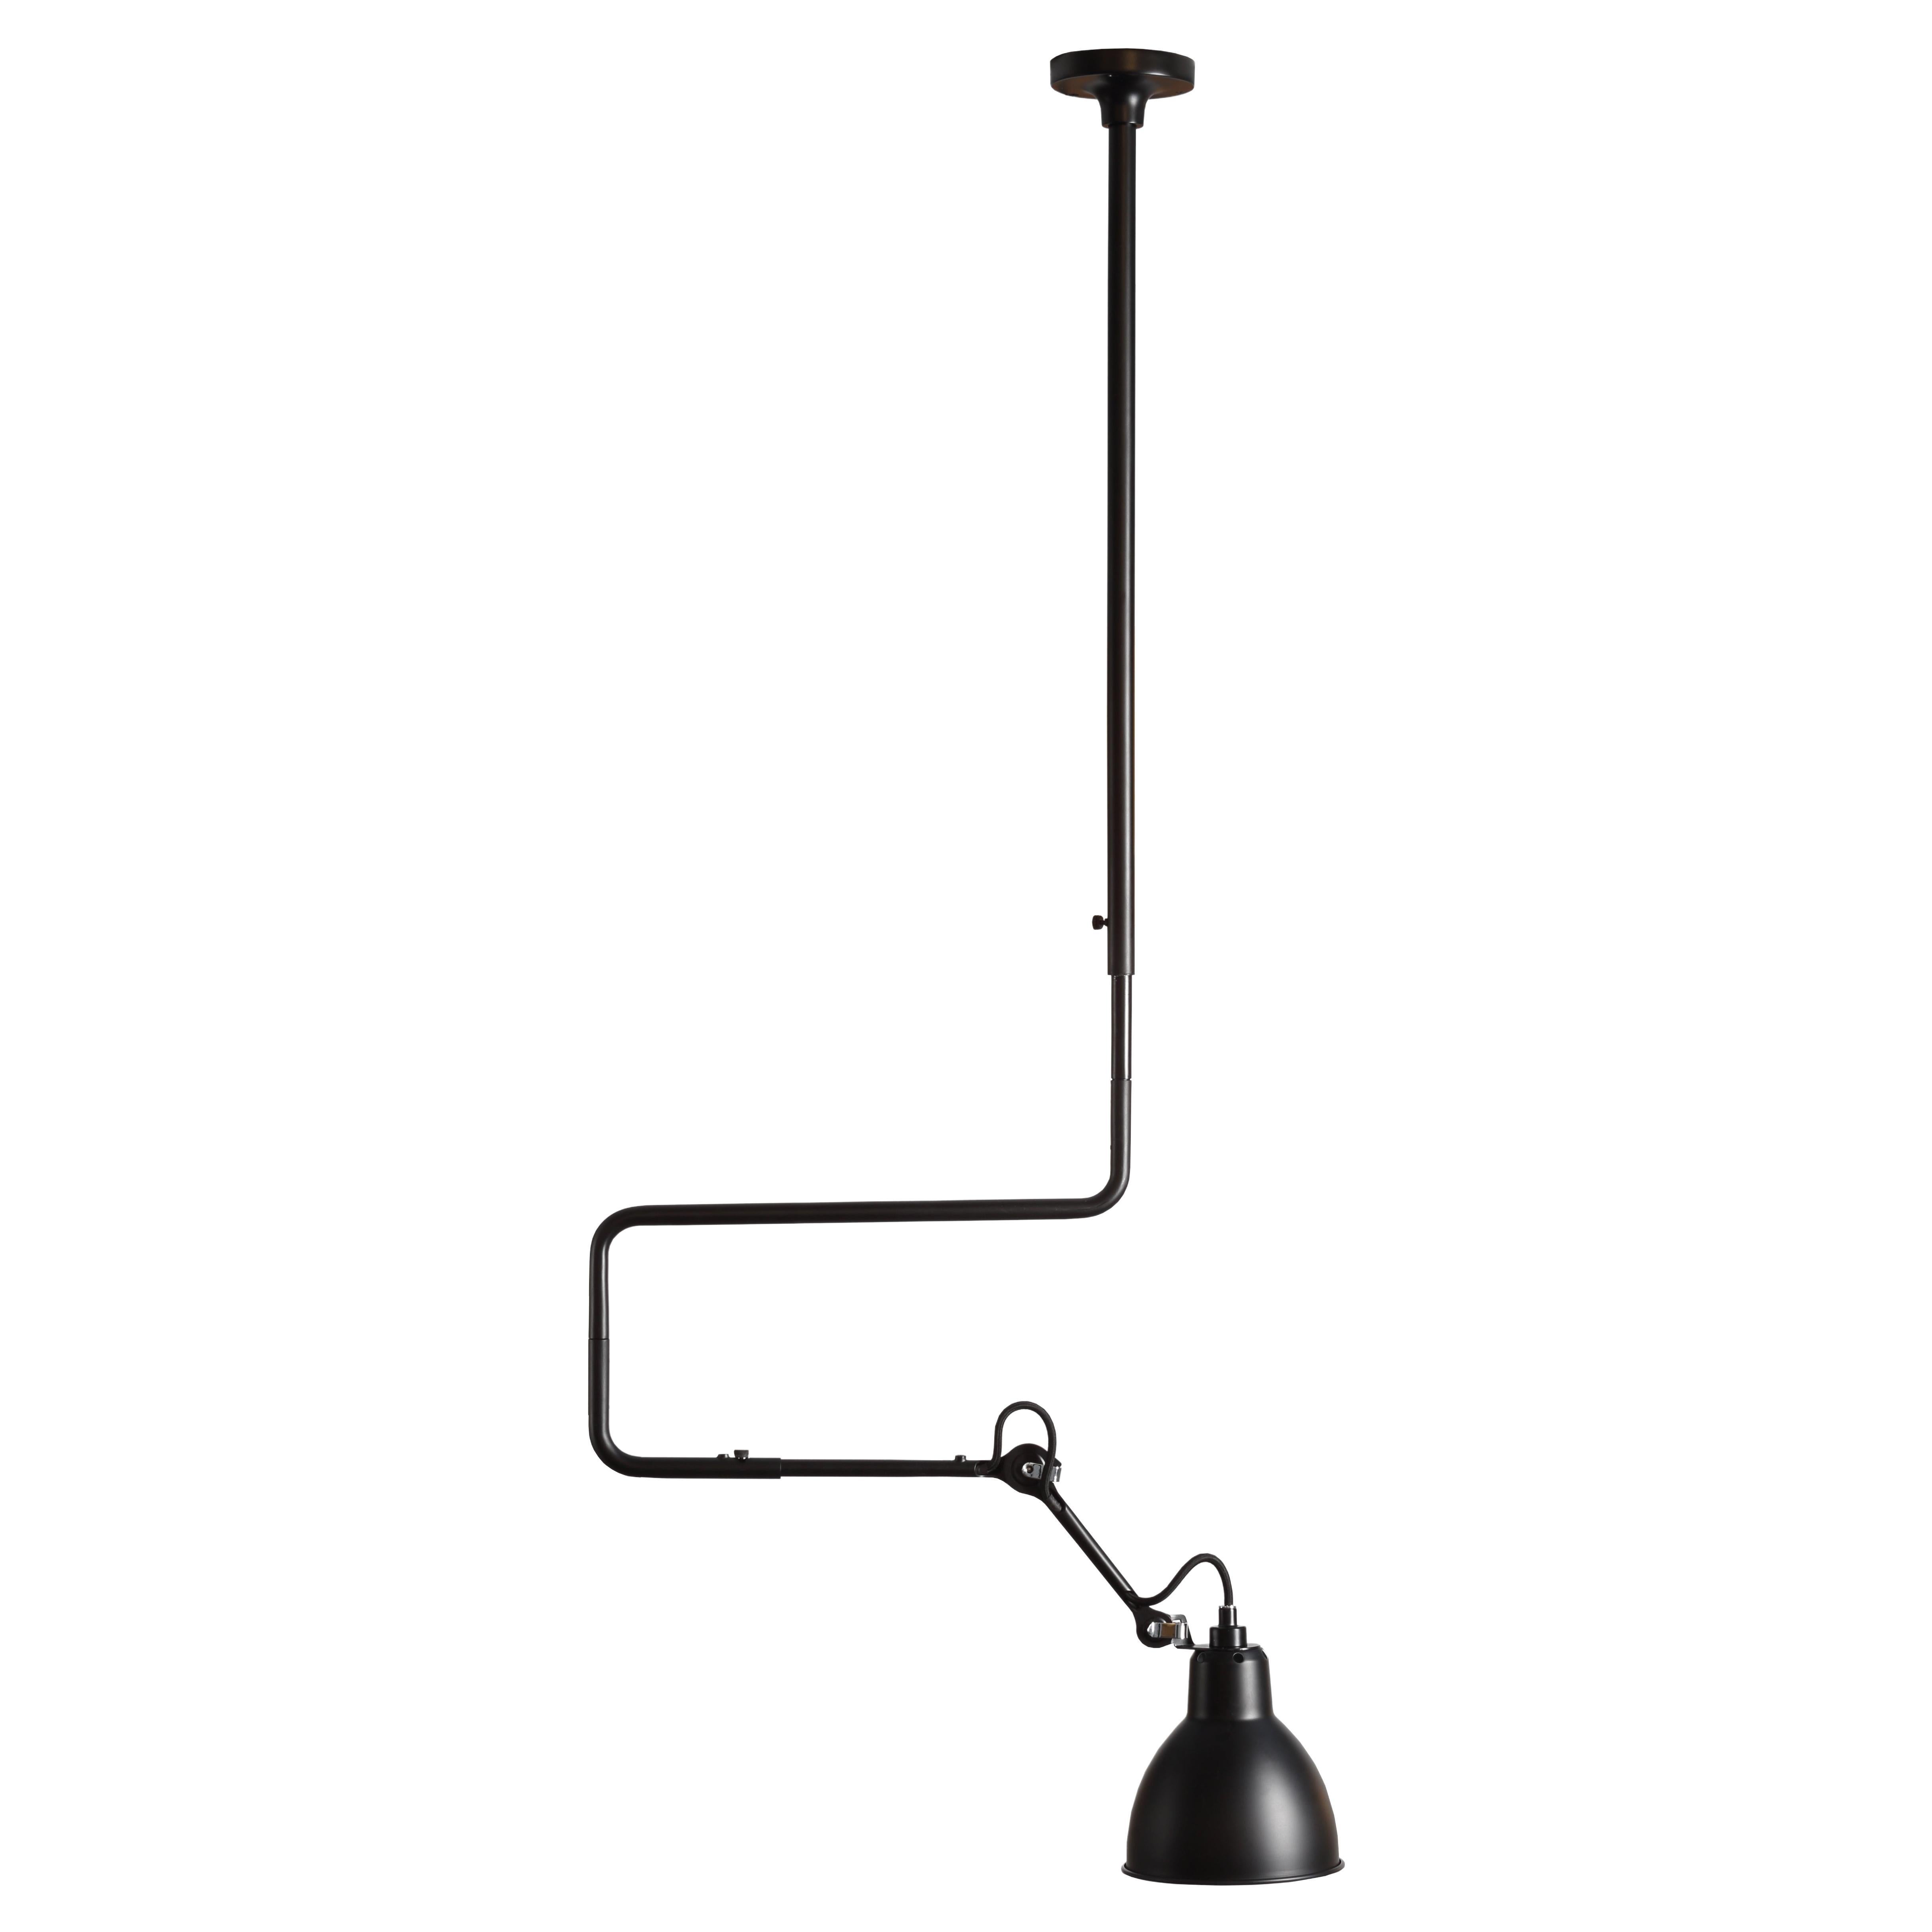 DCW Editions La Lampe Gras N°312 L Pendant Lamp in Black Arm and Black Shade For Sale